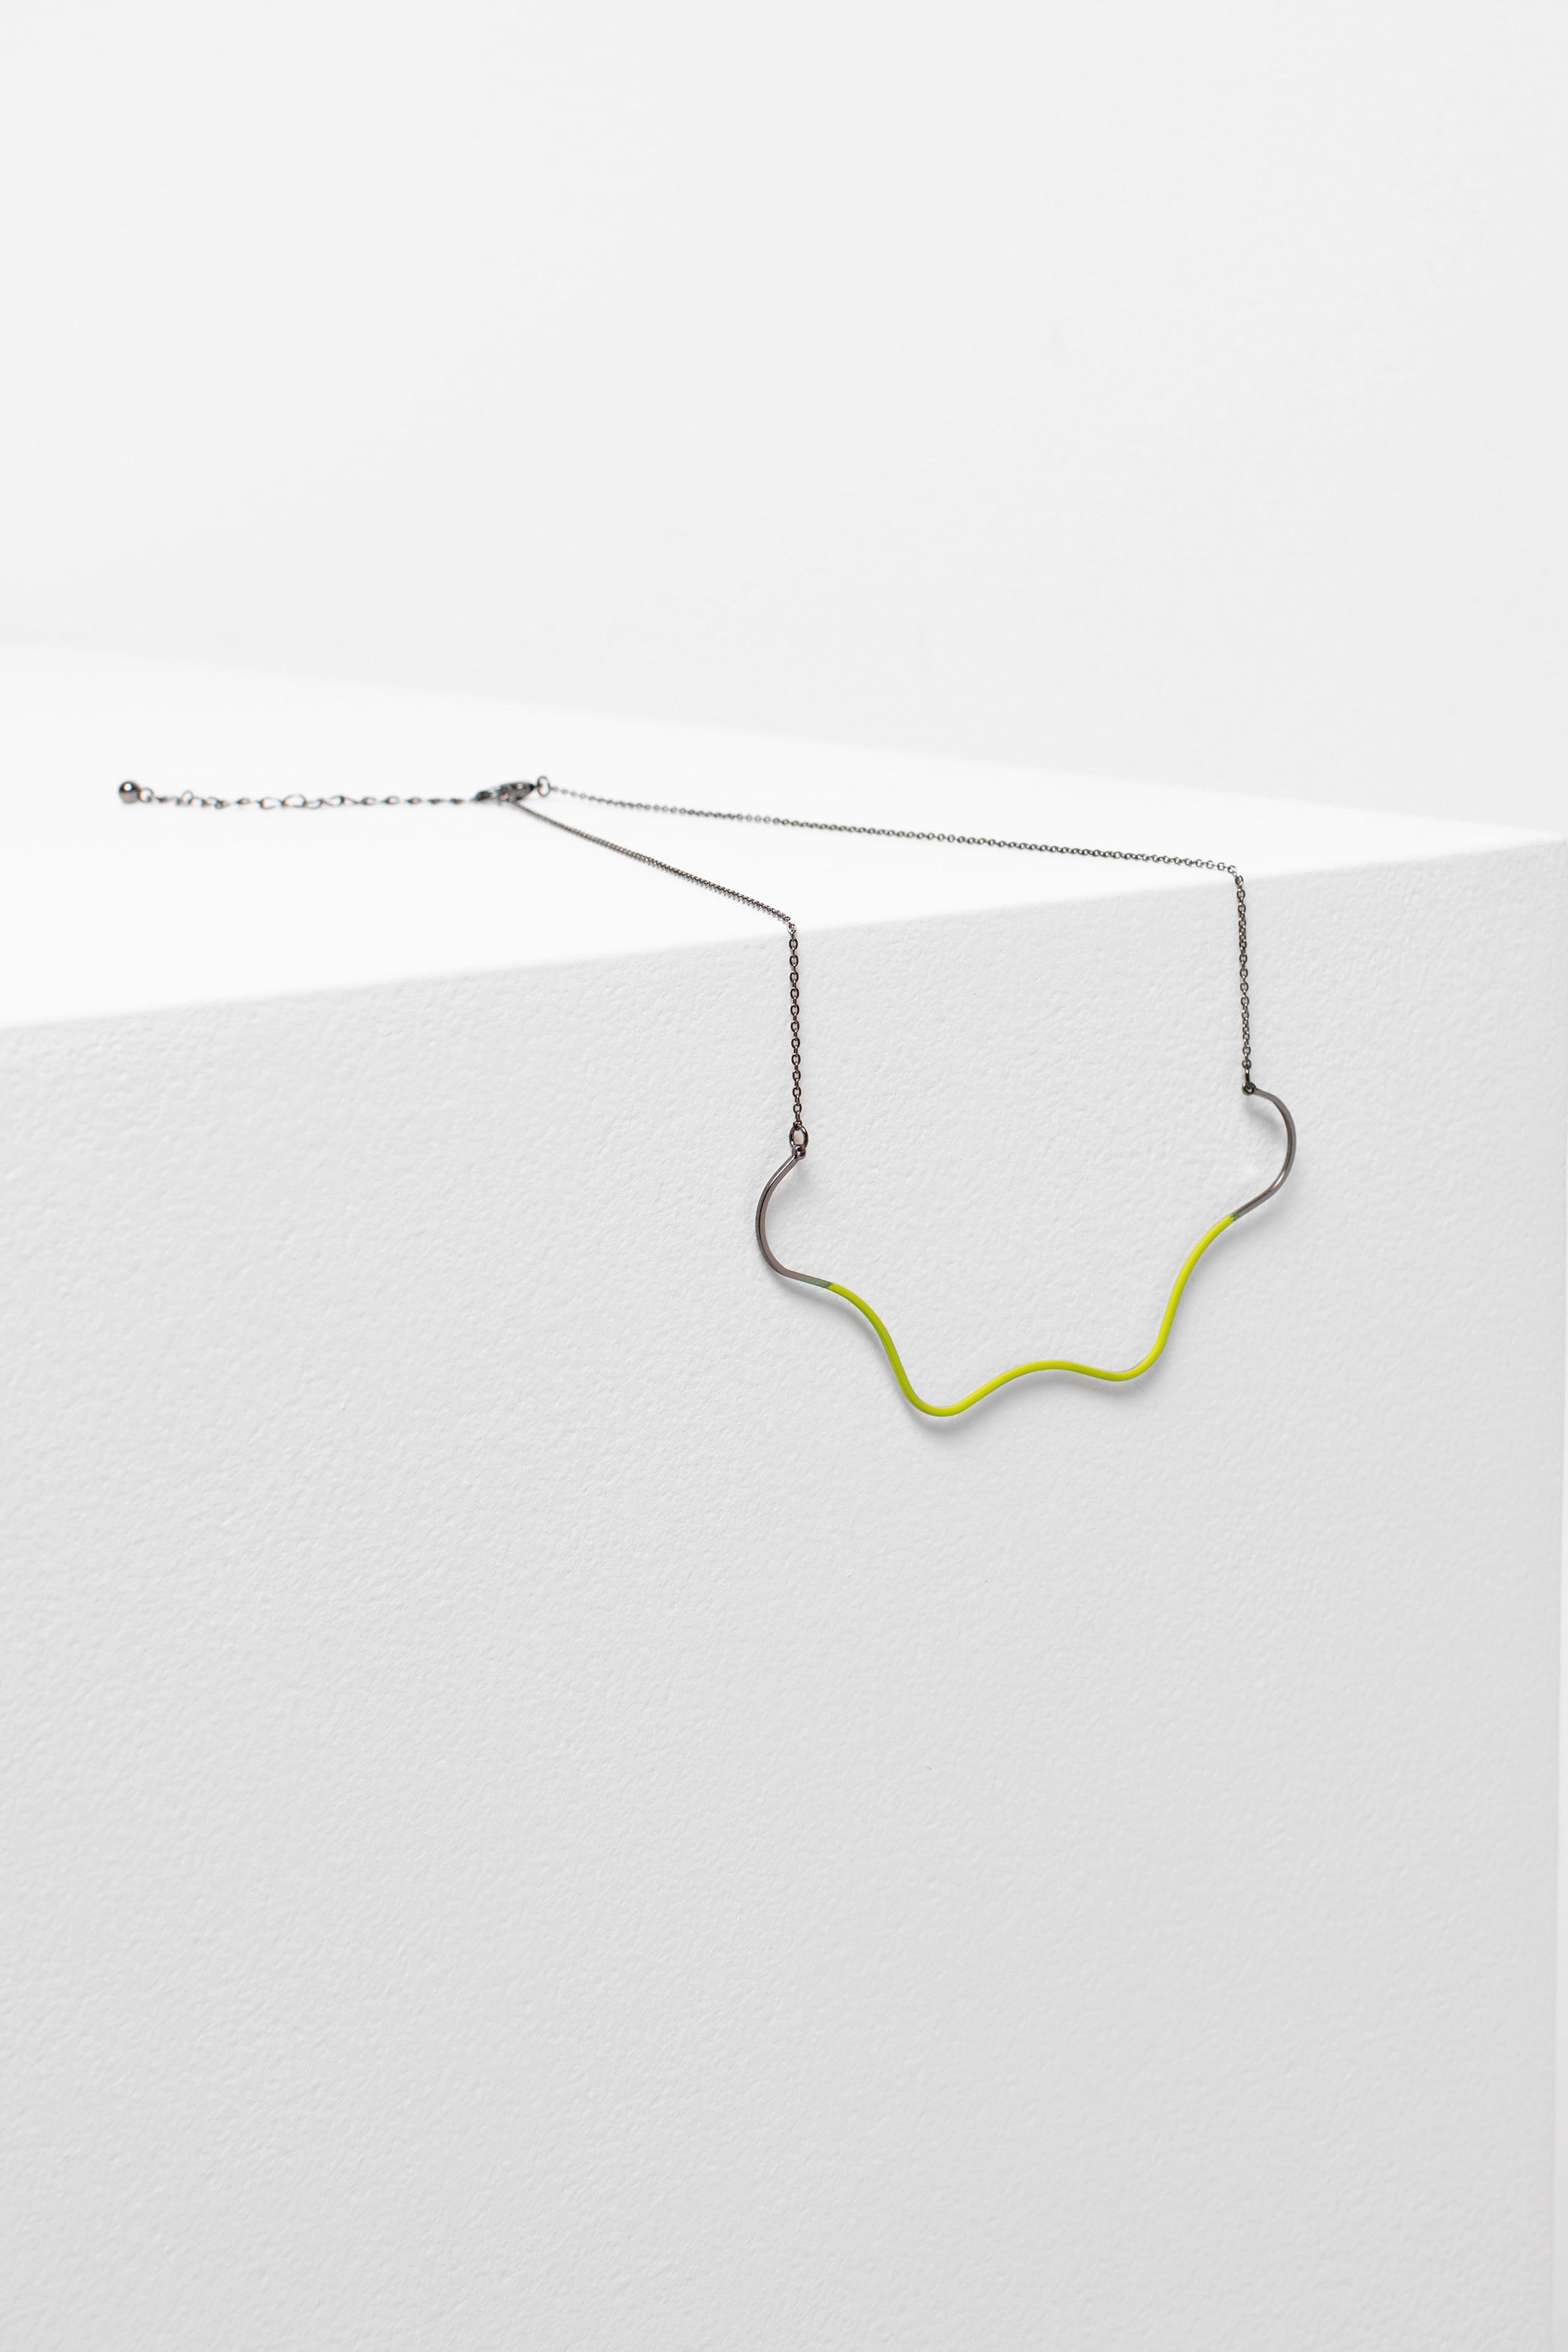 Wave Chain and Wavey Fine Metal Colour Dipped Pendant Necklace | LIMEADE